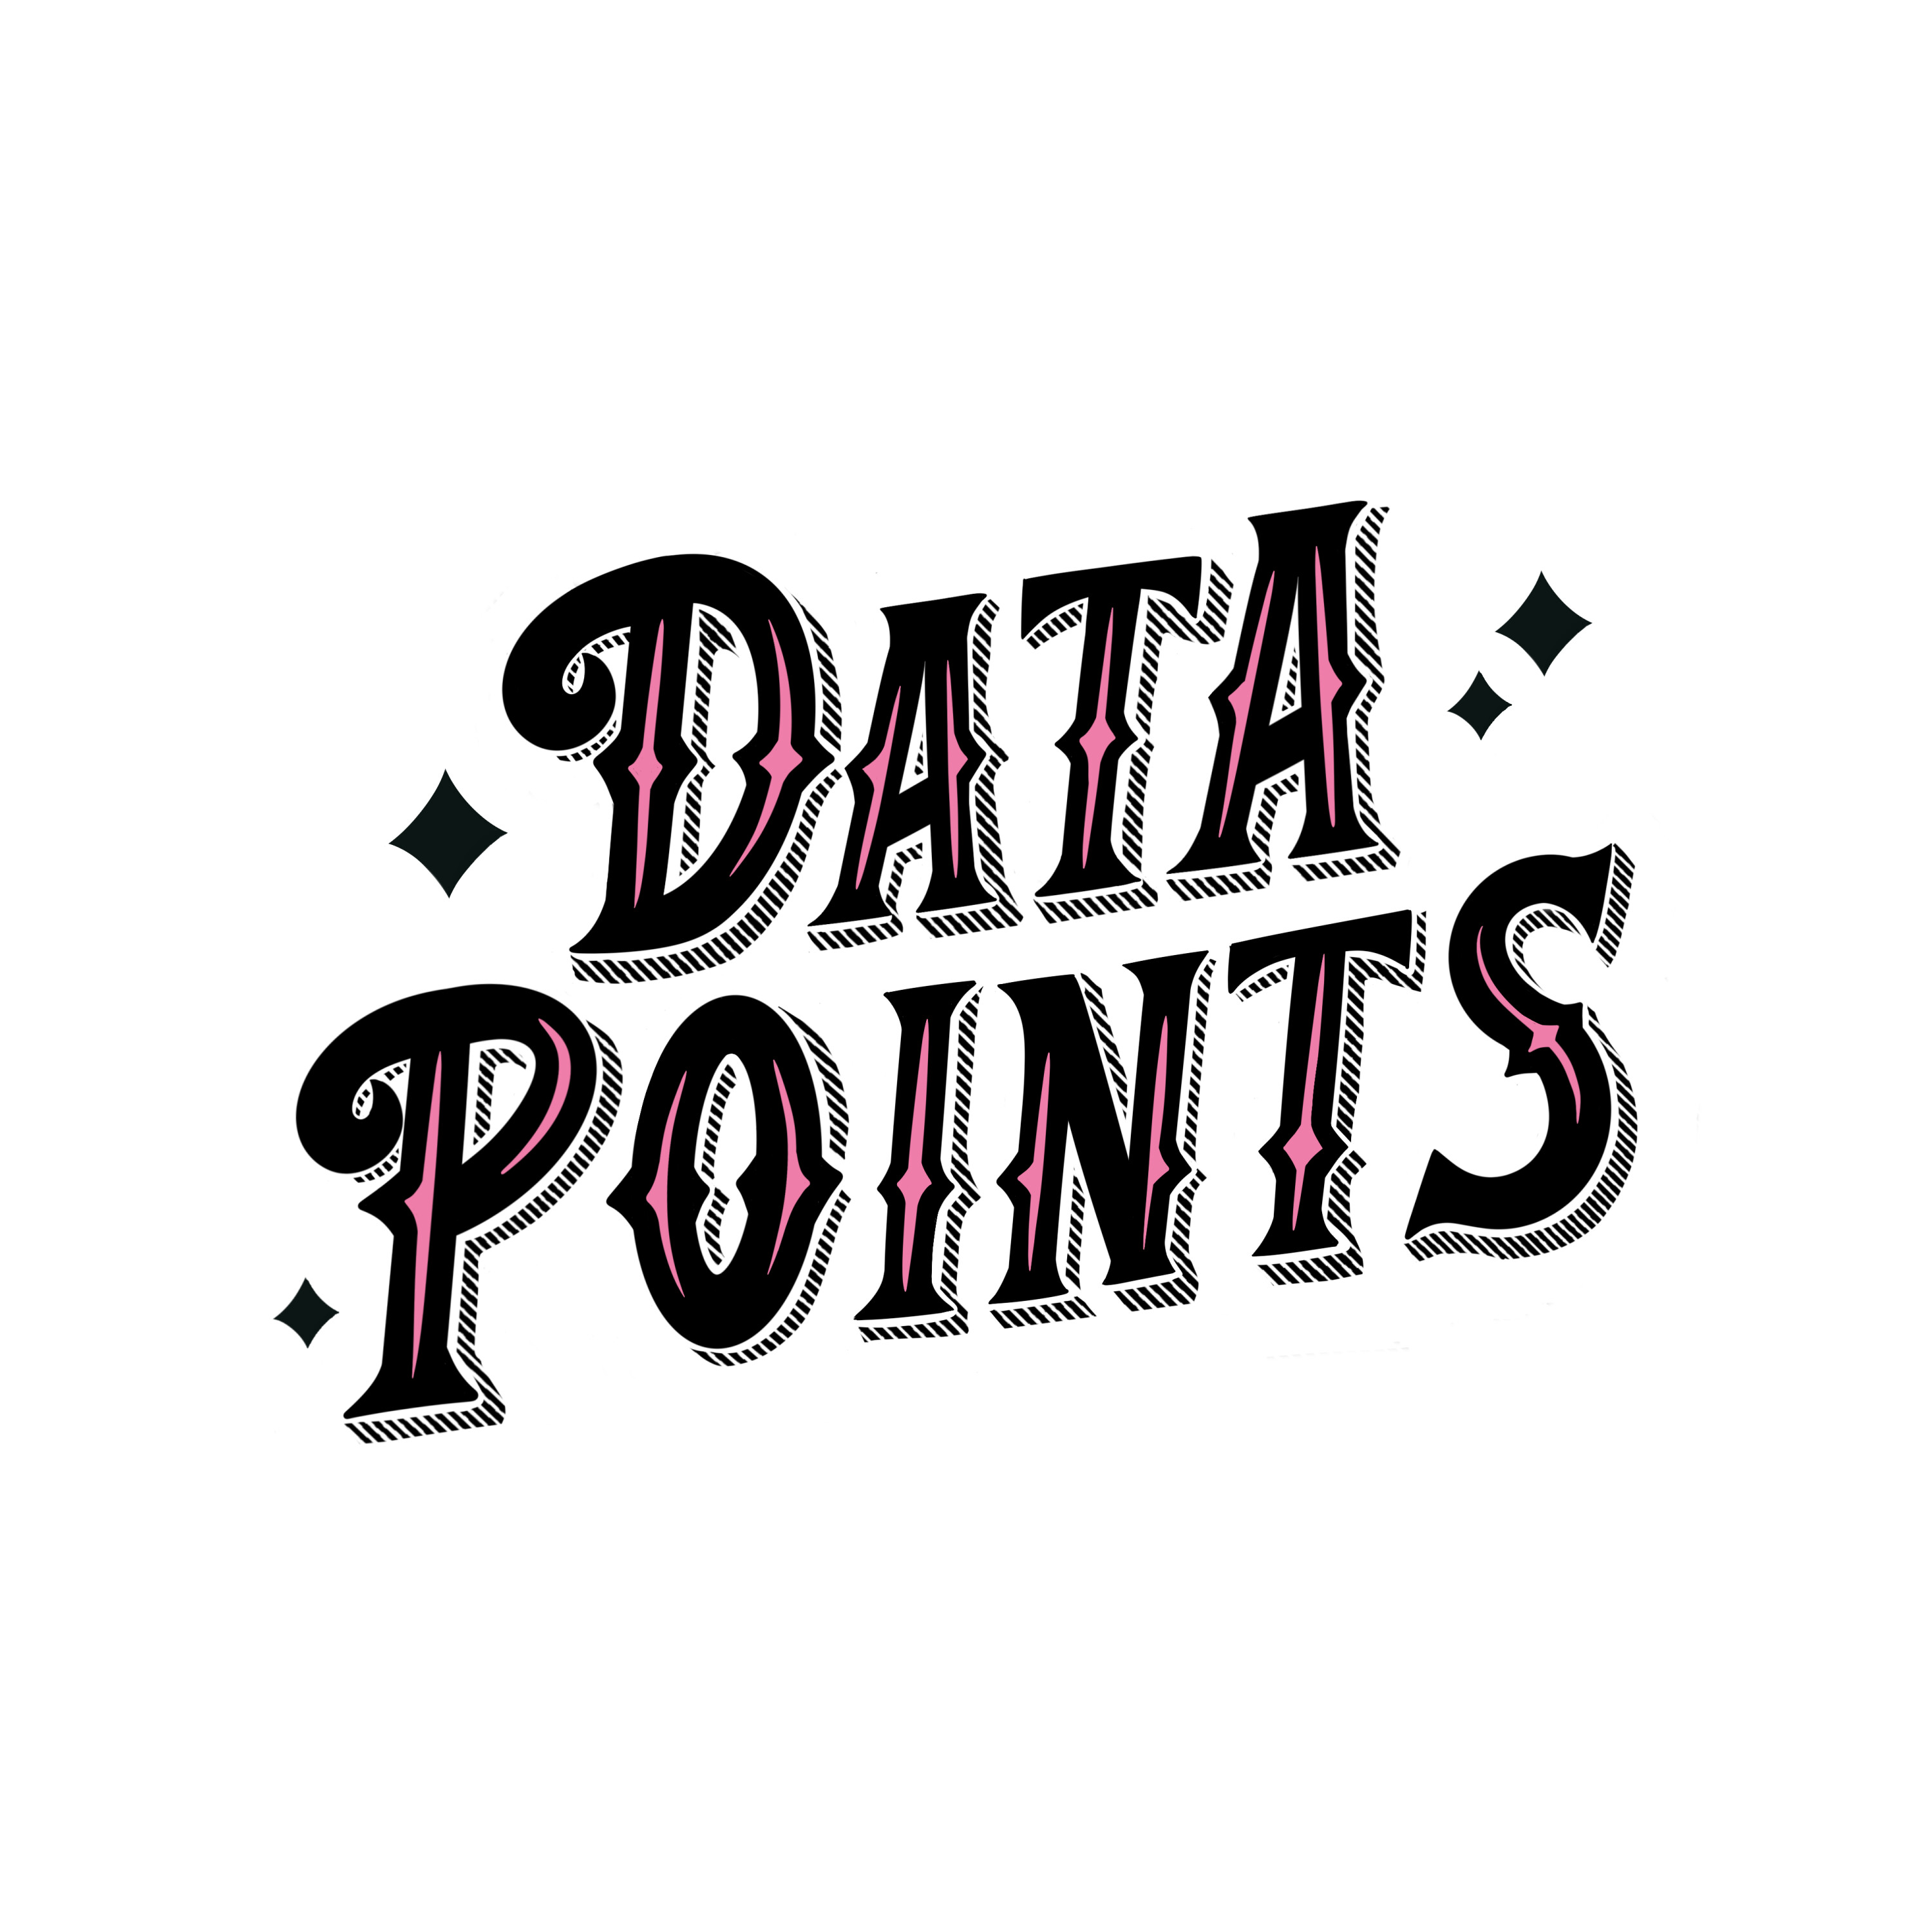 Data Points: Munchausen Syndrome by Proxy (featuring Andrea Dunlop)